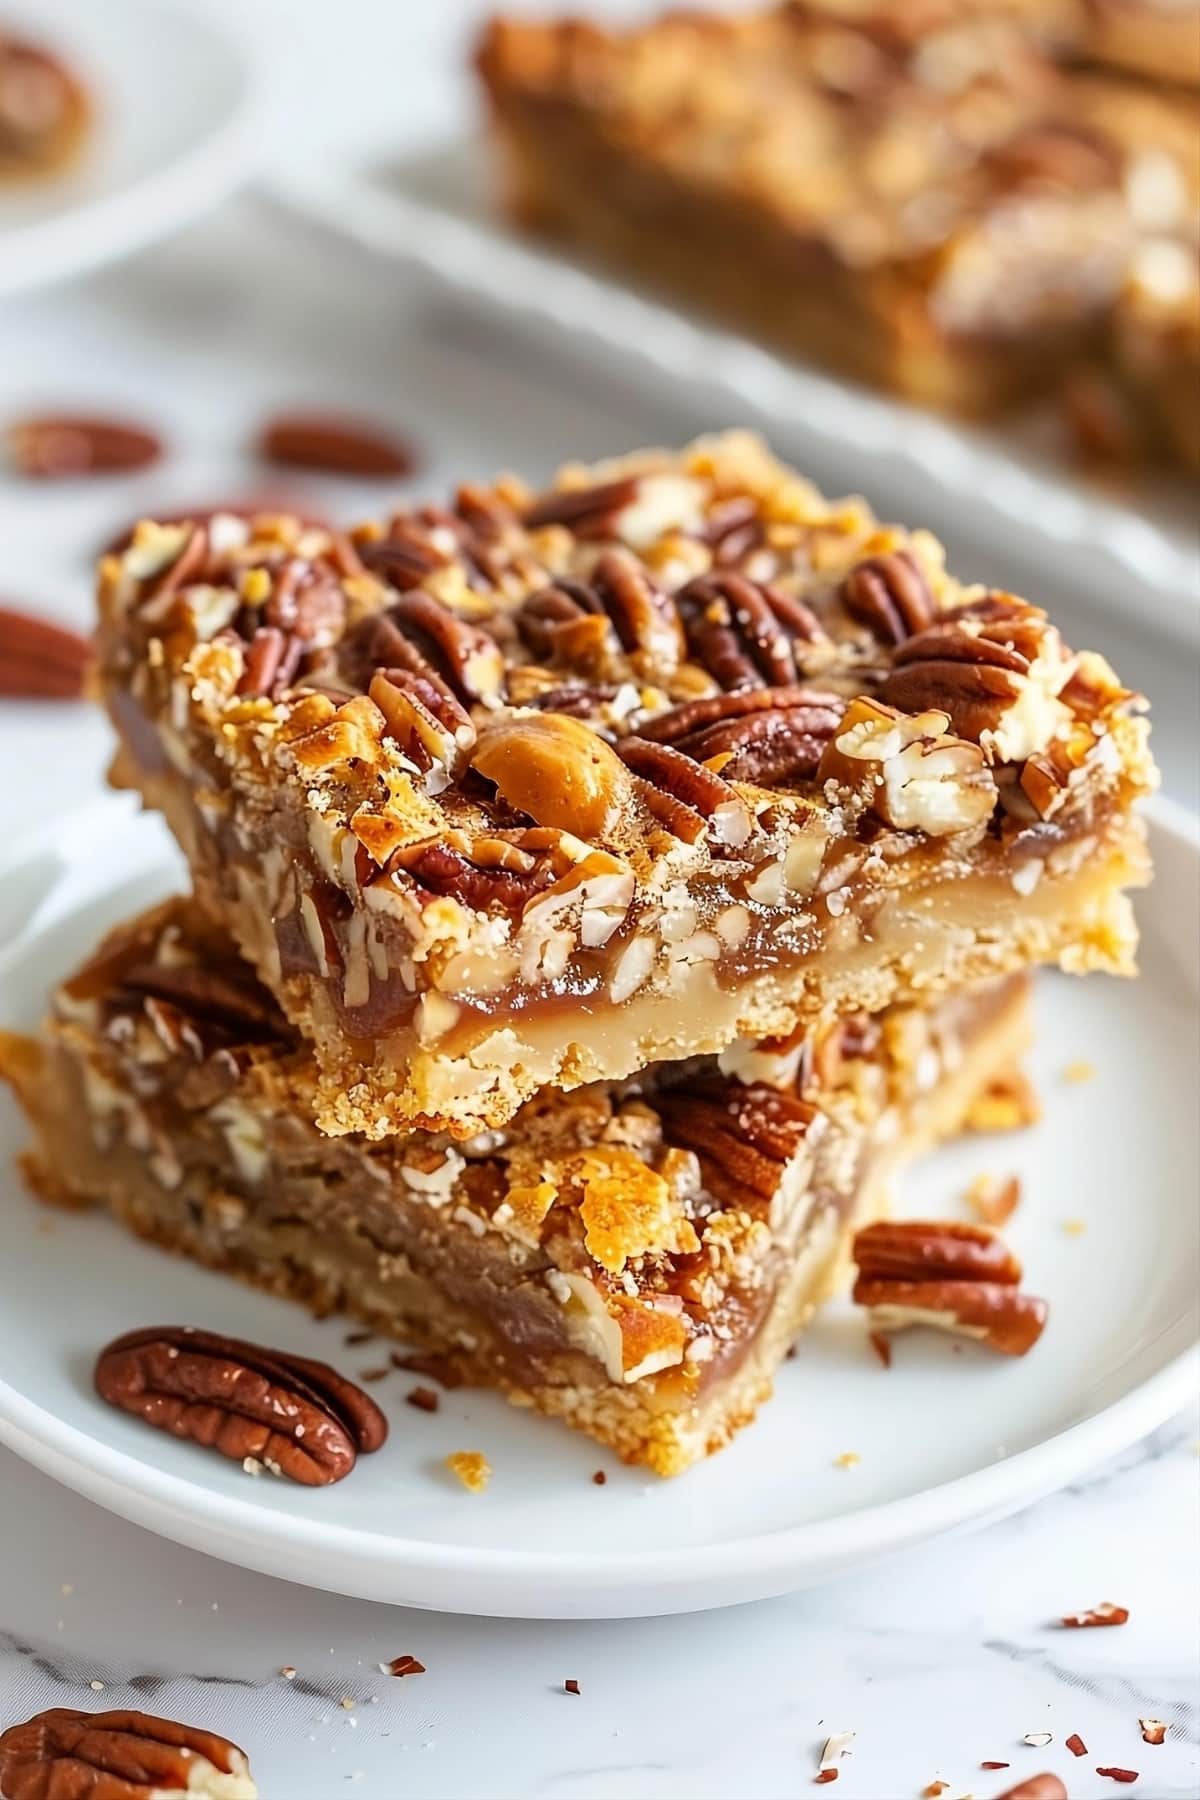 Two square slices of caramel pecan dream bars on a white plate.